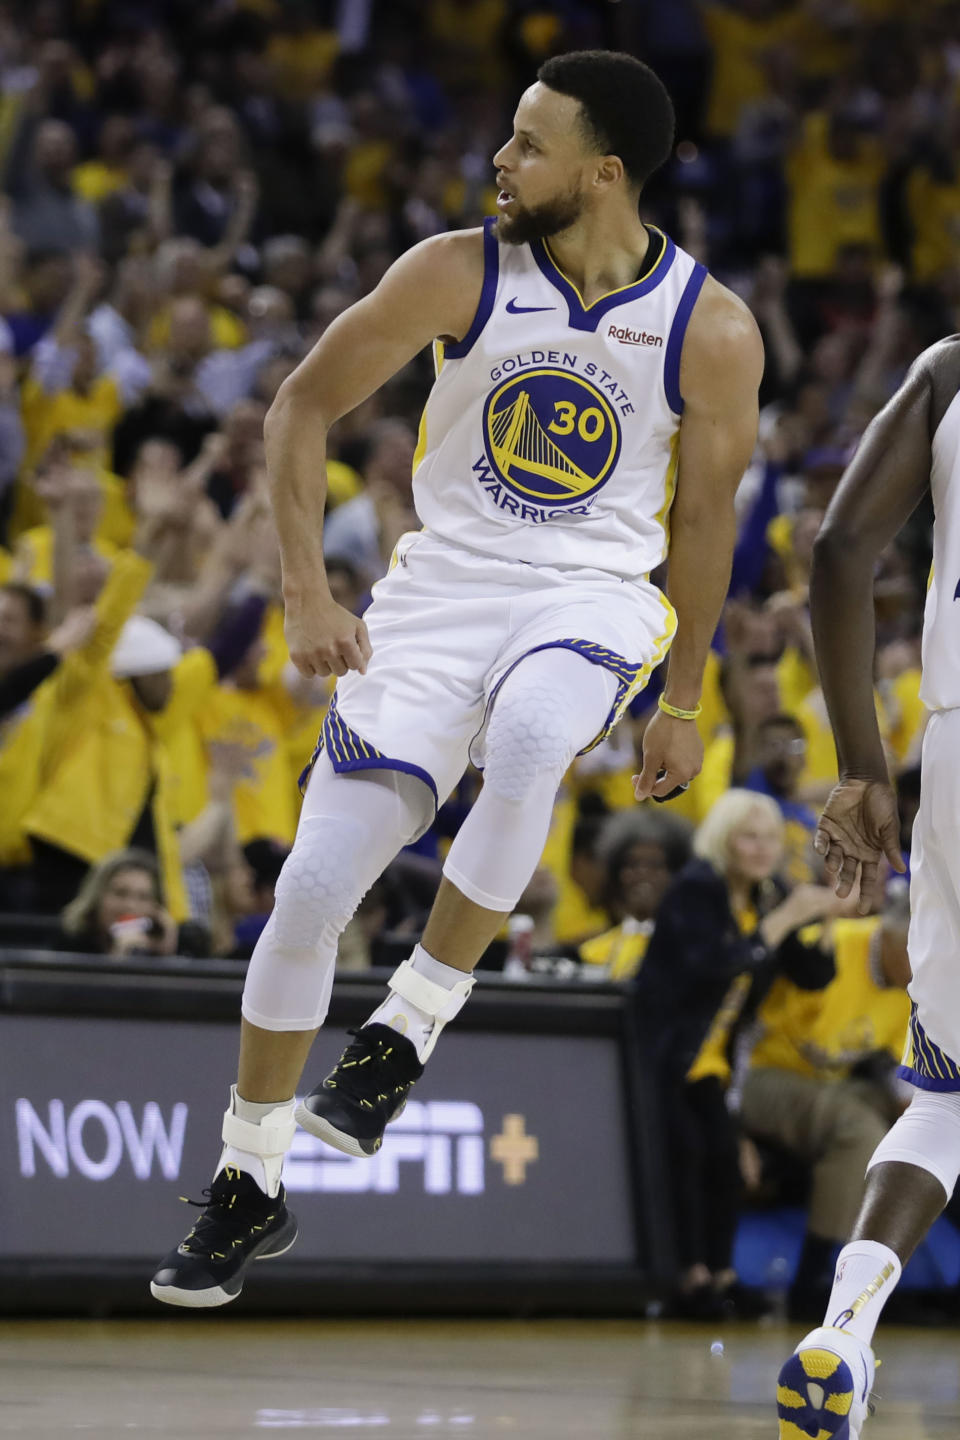 Golden State Warriors guard Stephen Curry (30) celebrates after making a 3-point basket against the Toronto Raptors during the first half of Game 3 of basketball's NBA Finals in Oakland, Calif., Wednesday, June 5, 2019. (AP Photo/Ben Margot)